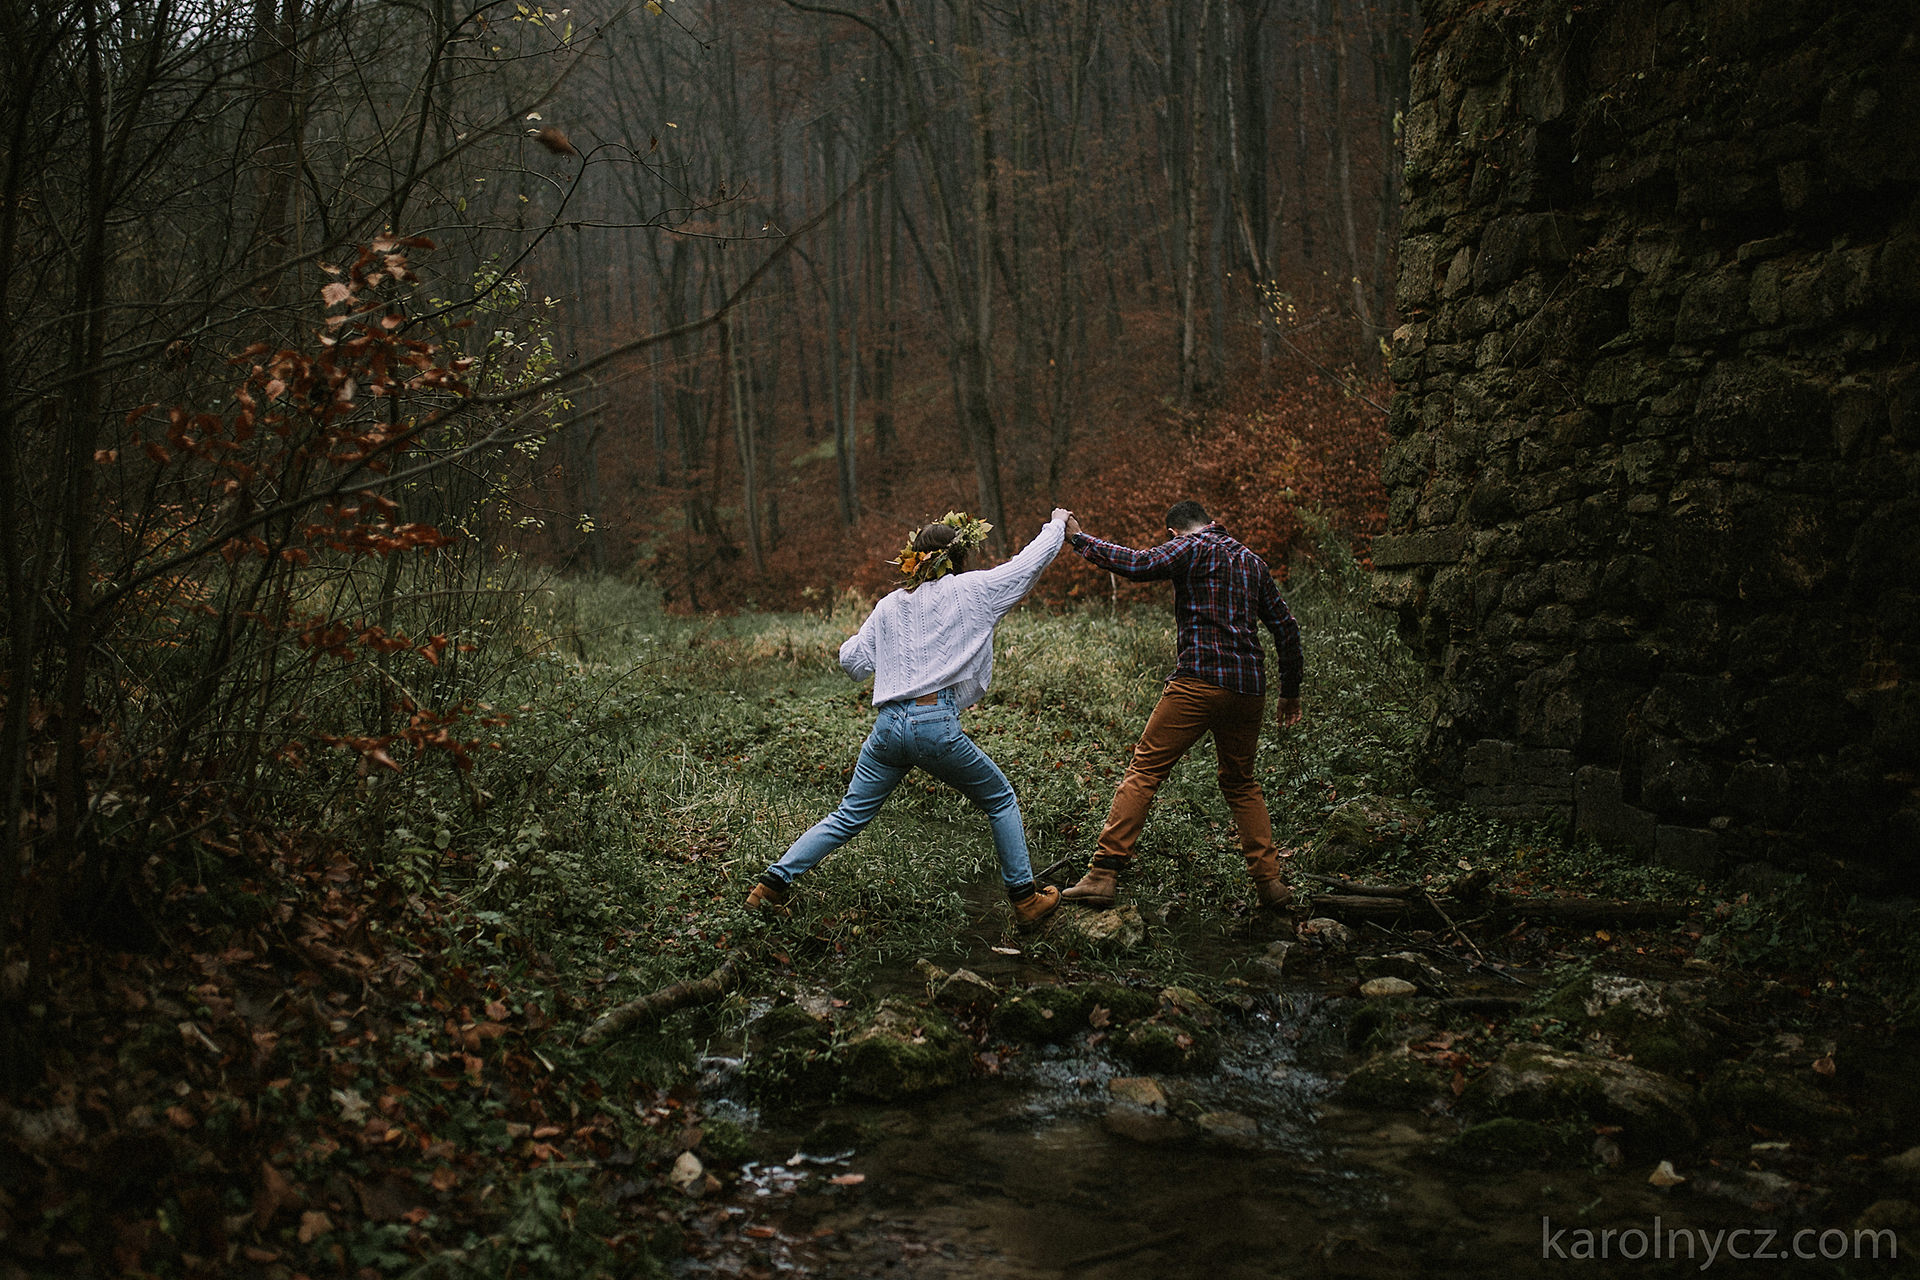 the beautiful forest scenery of the engagement session